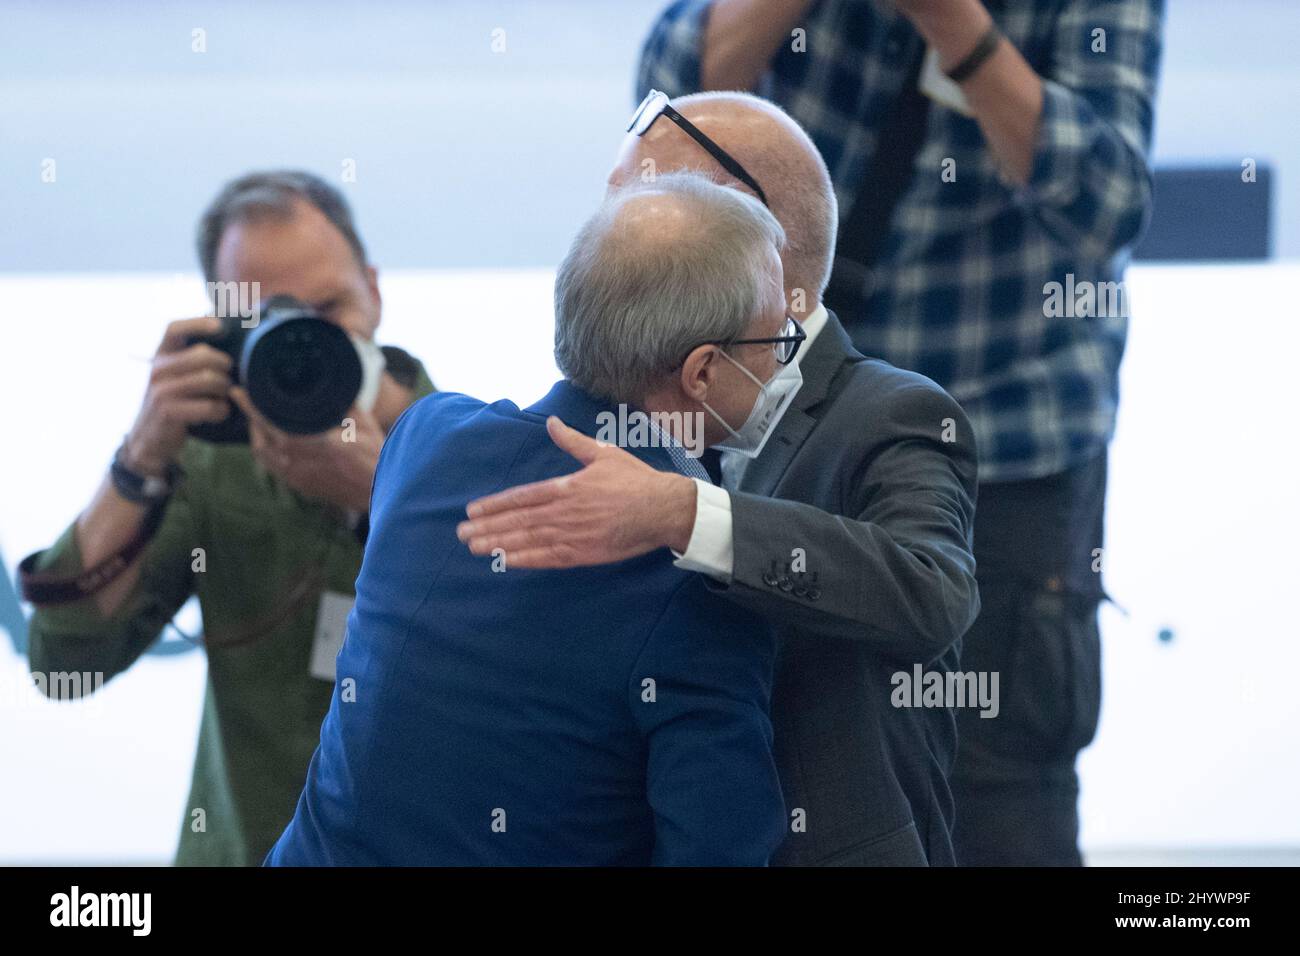 left to right Peter PETERS, candidate for DFB President, congratulates Bernd NEUENDORF on his election as DFB President, 44th Ordinary DFB Bundestag on March 11th, 2022 in Bonn/ Germany. Stock Photo